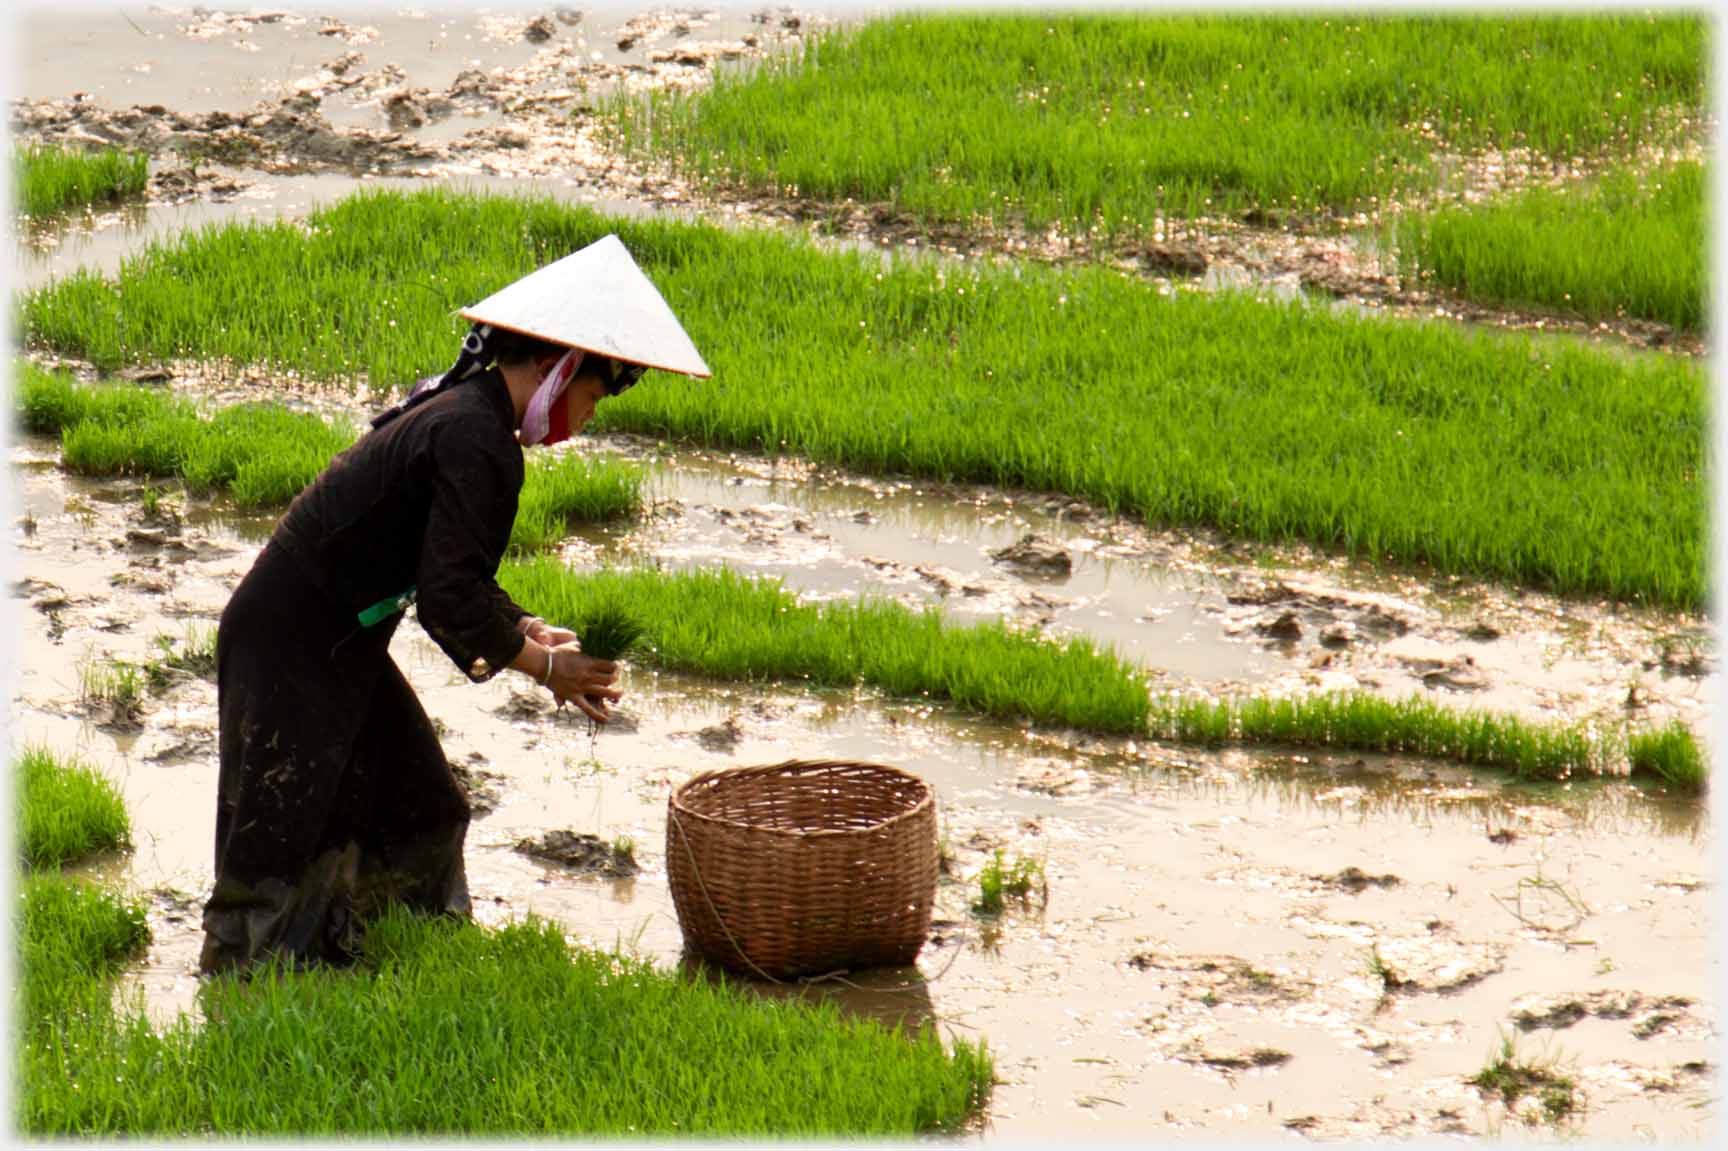 Woman going to place paddy in basket.